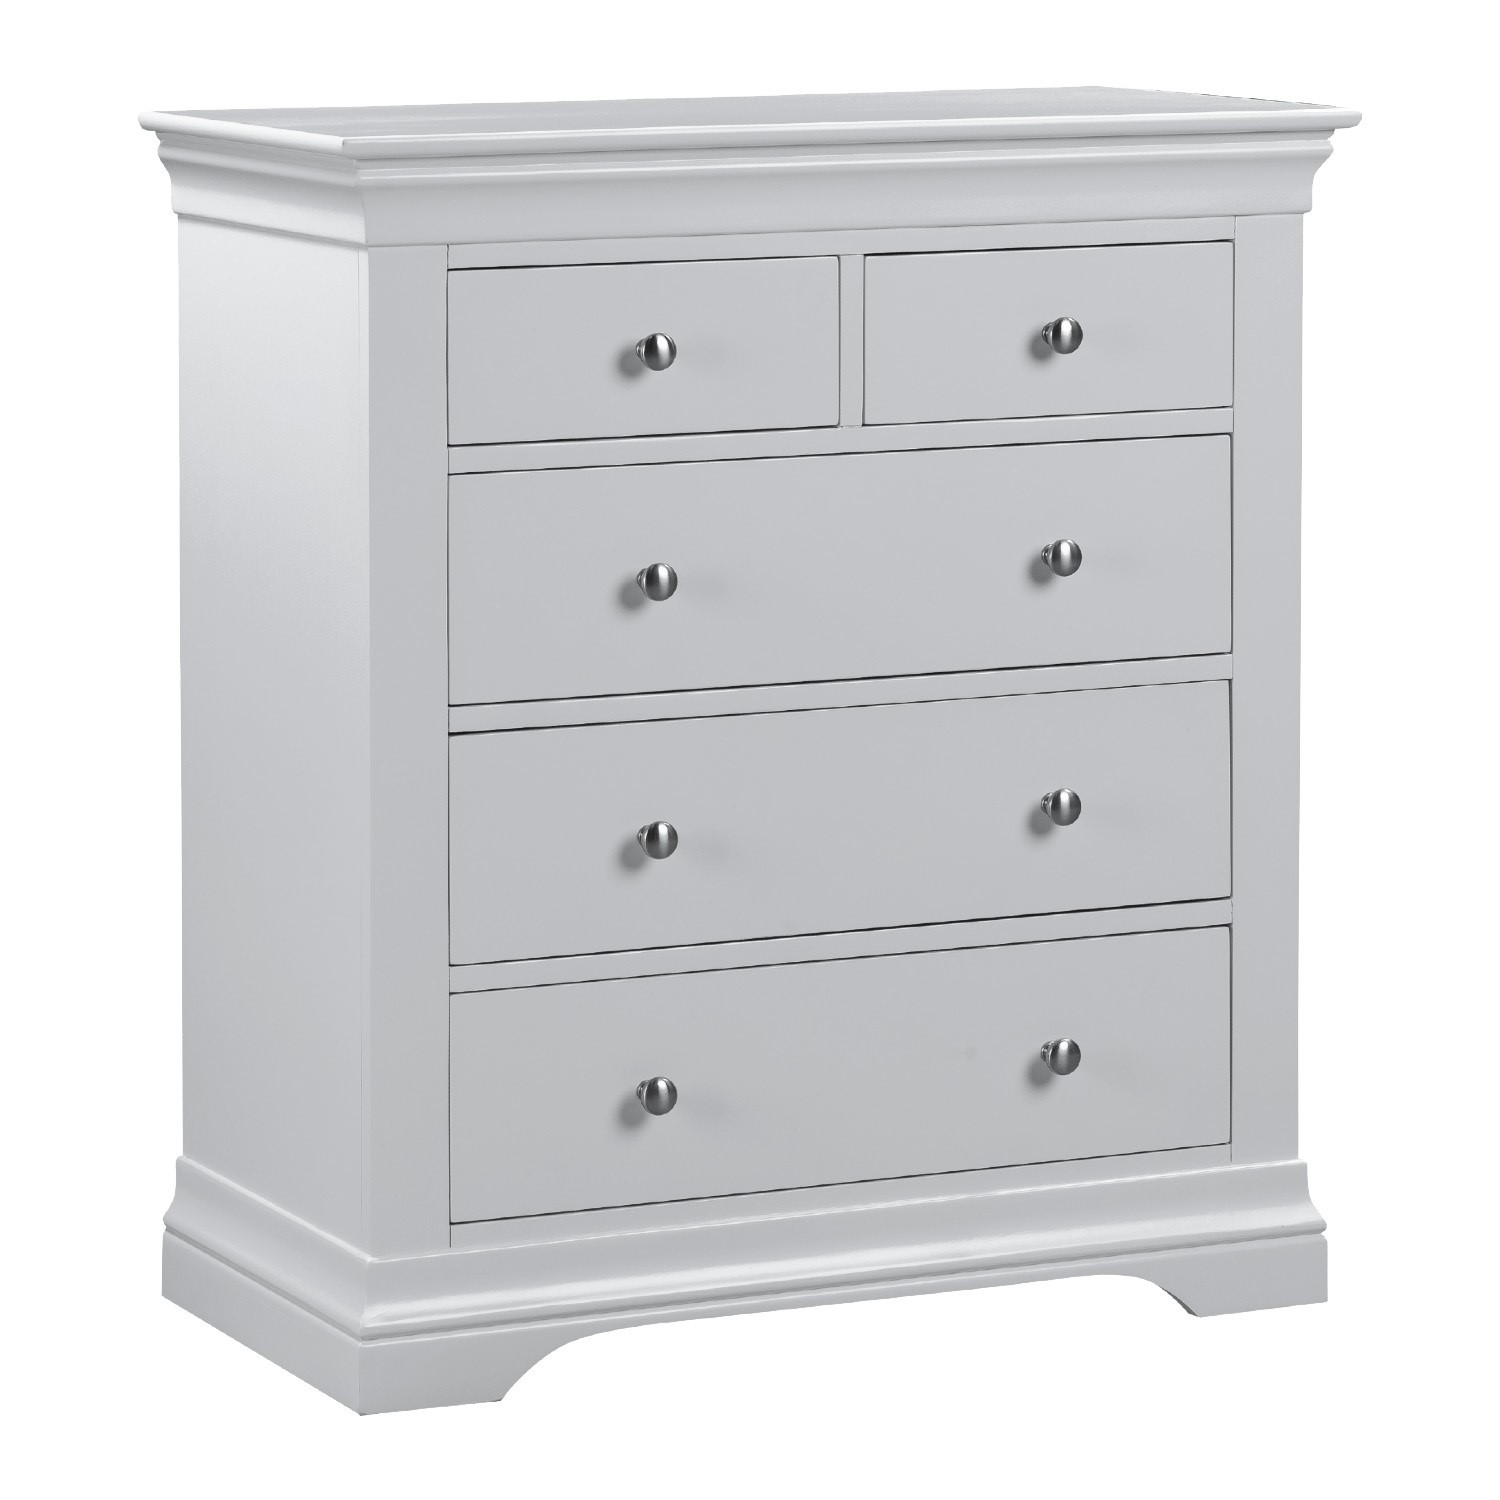 Read more about Pale grey 3 + 2 drawer chest of drawers olivia